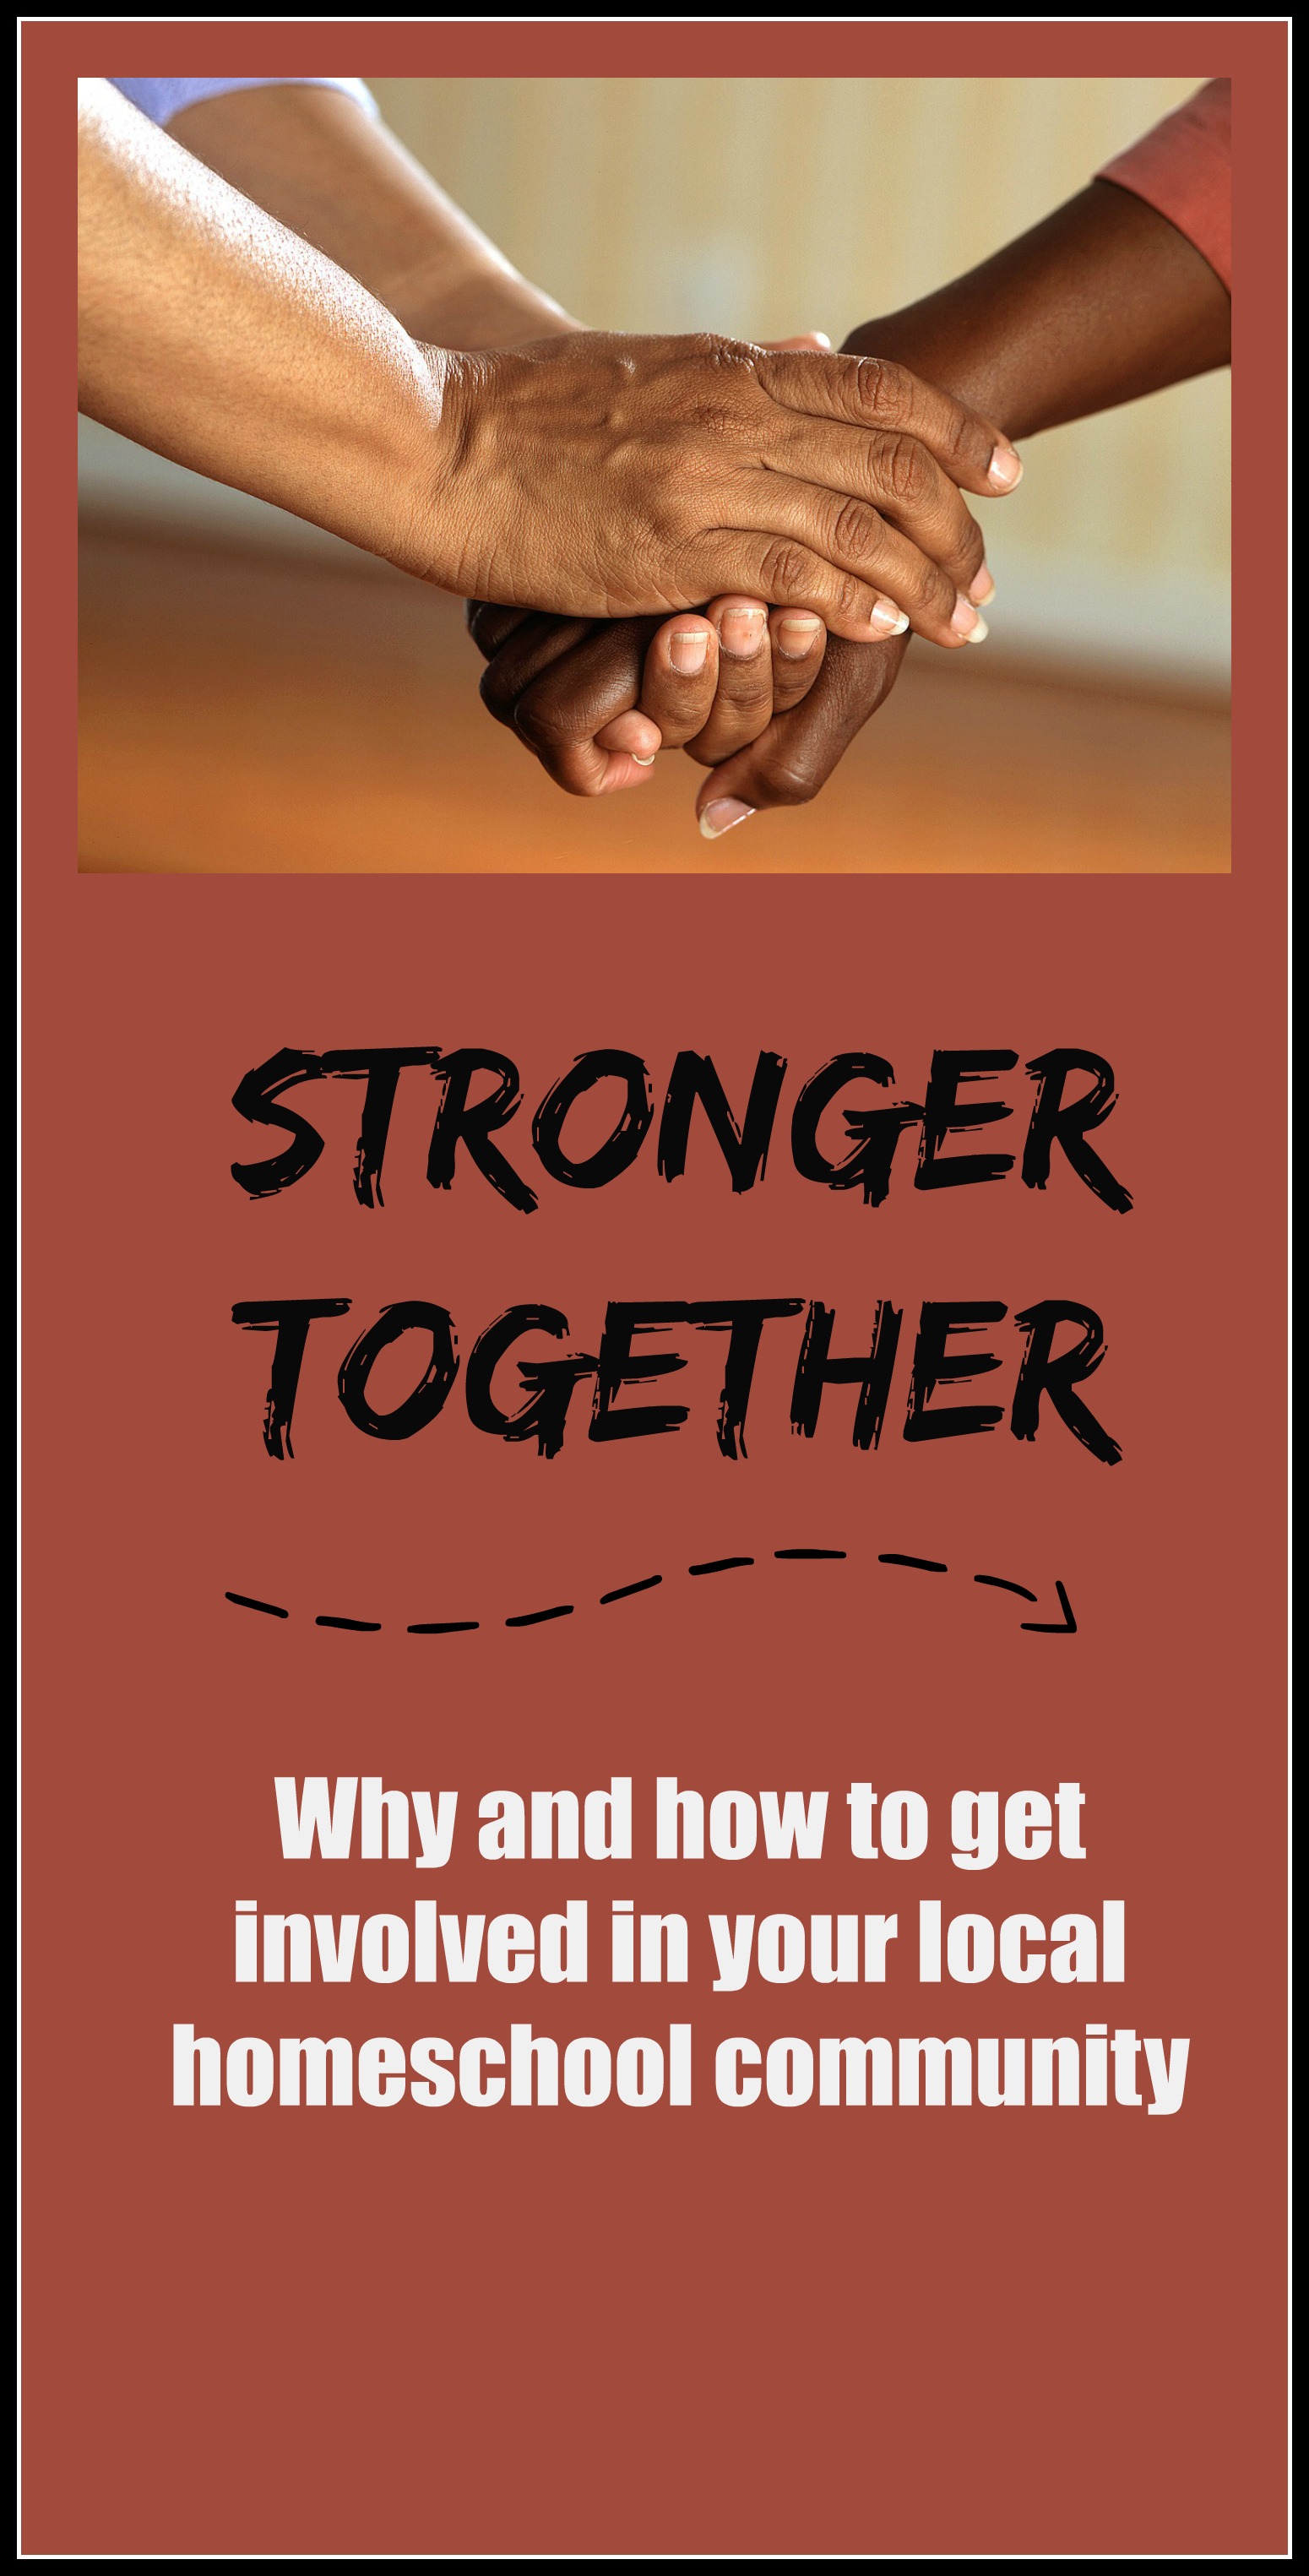 Stronger Together: Why and how to get involved in your local homeschool community.